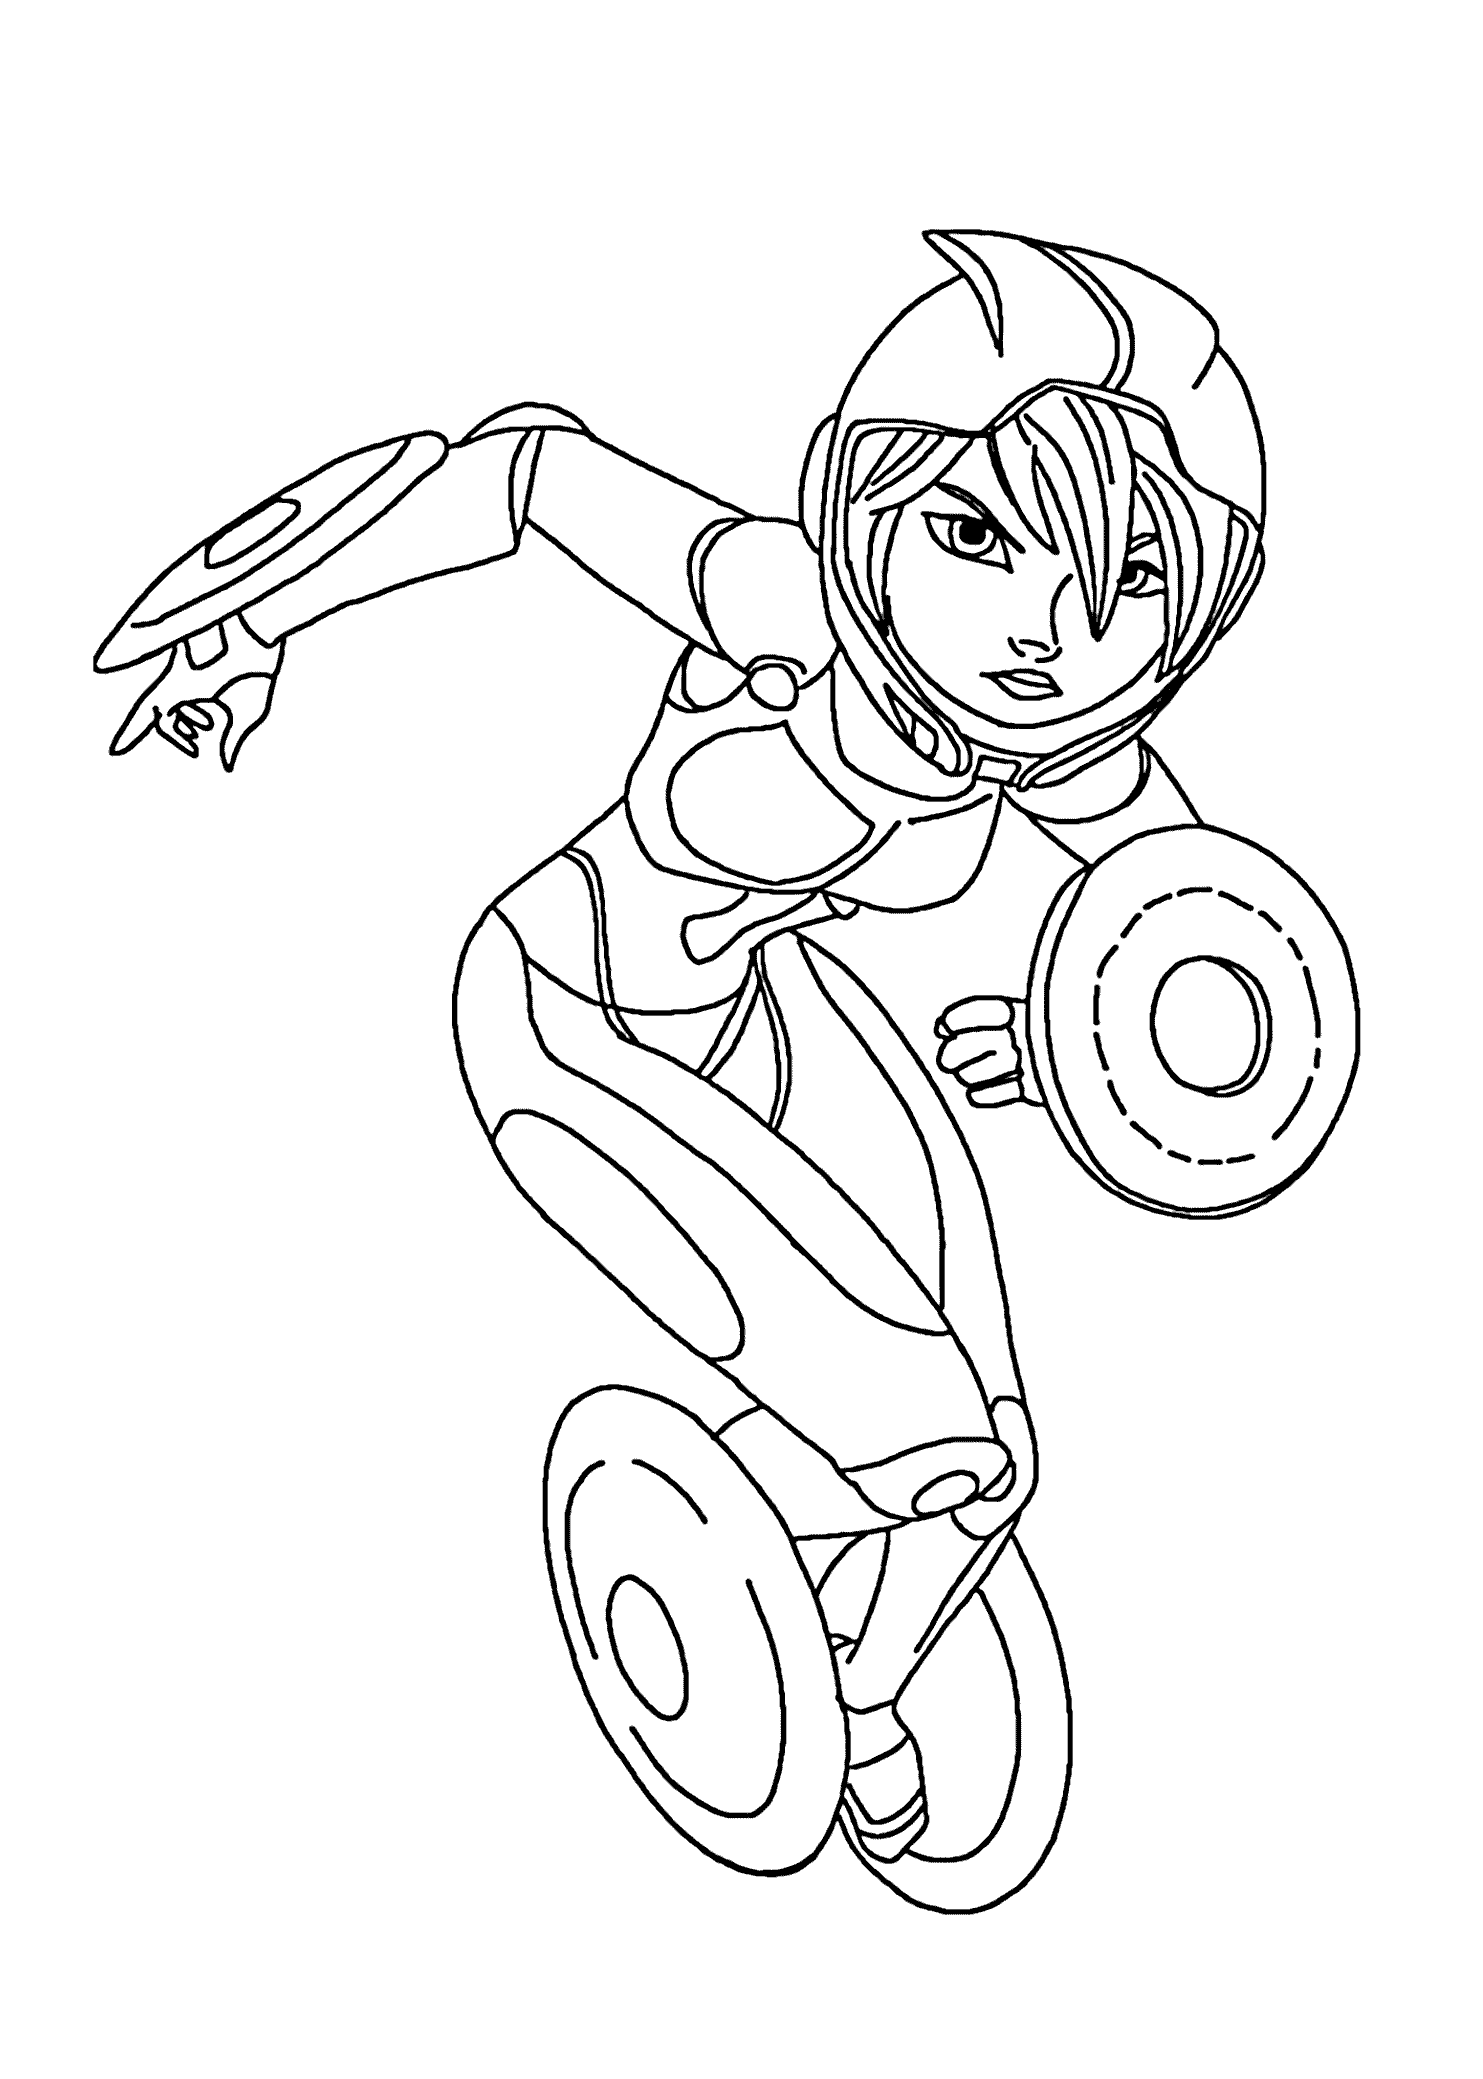 Gogo Tomago hero coloring pages for kids, printable free - Big ...